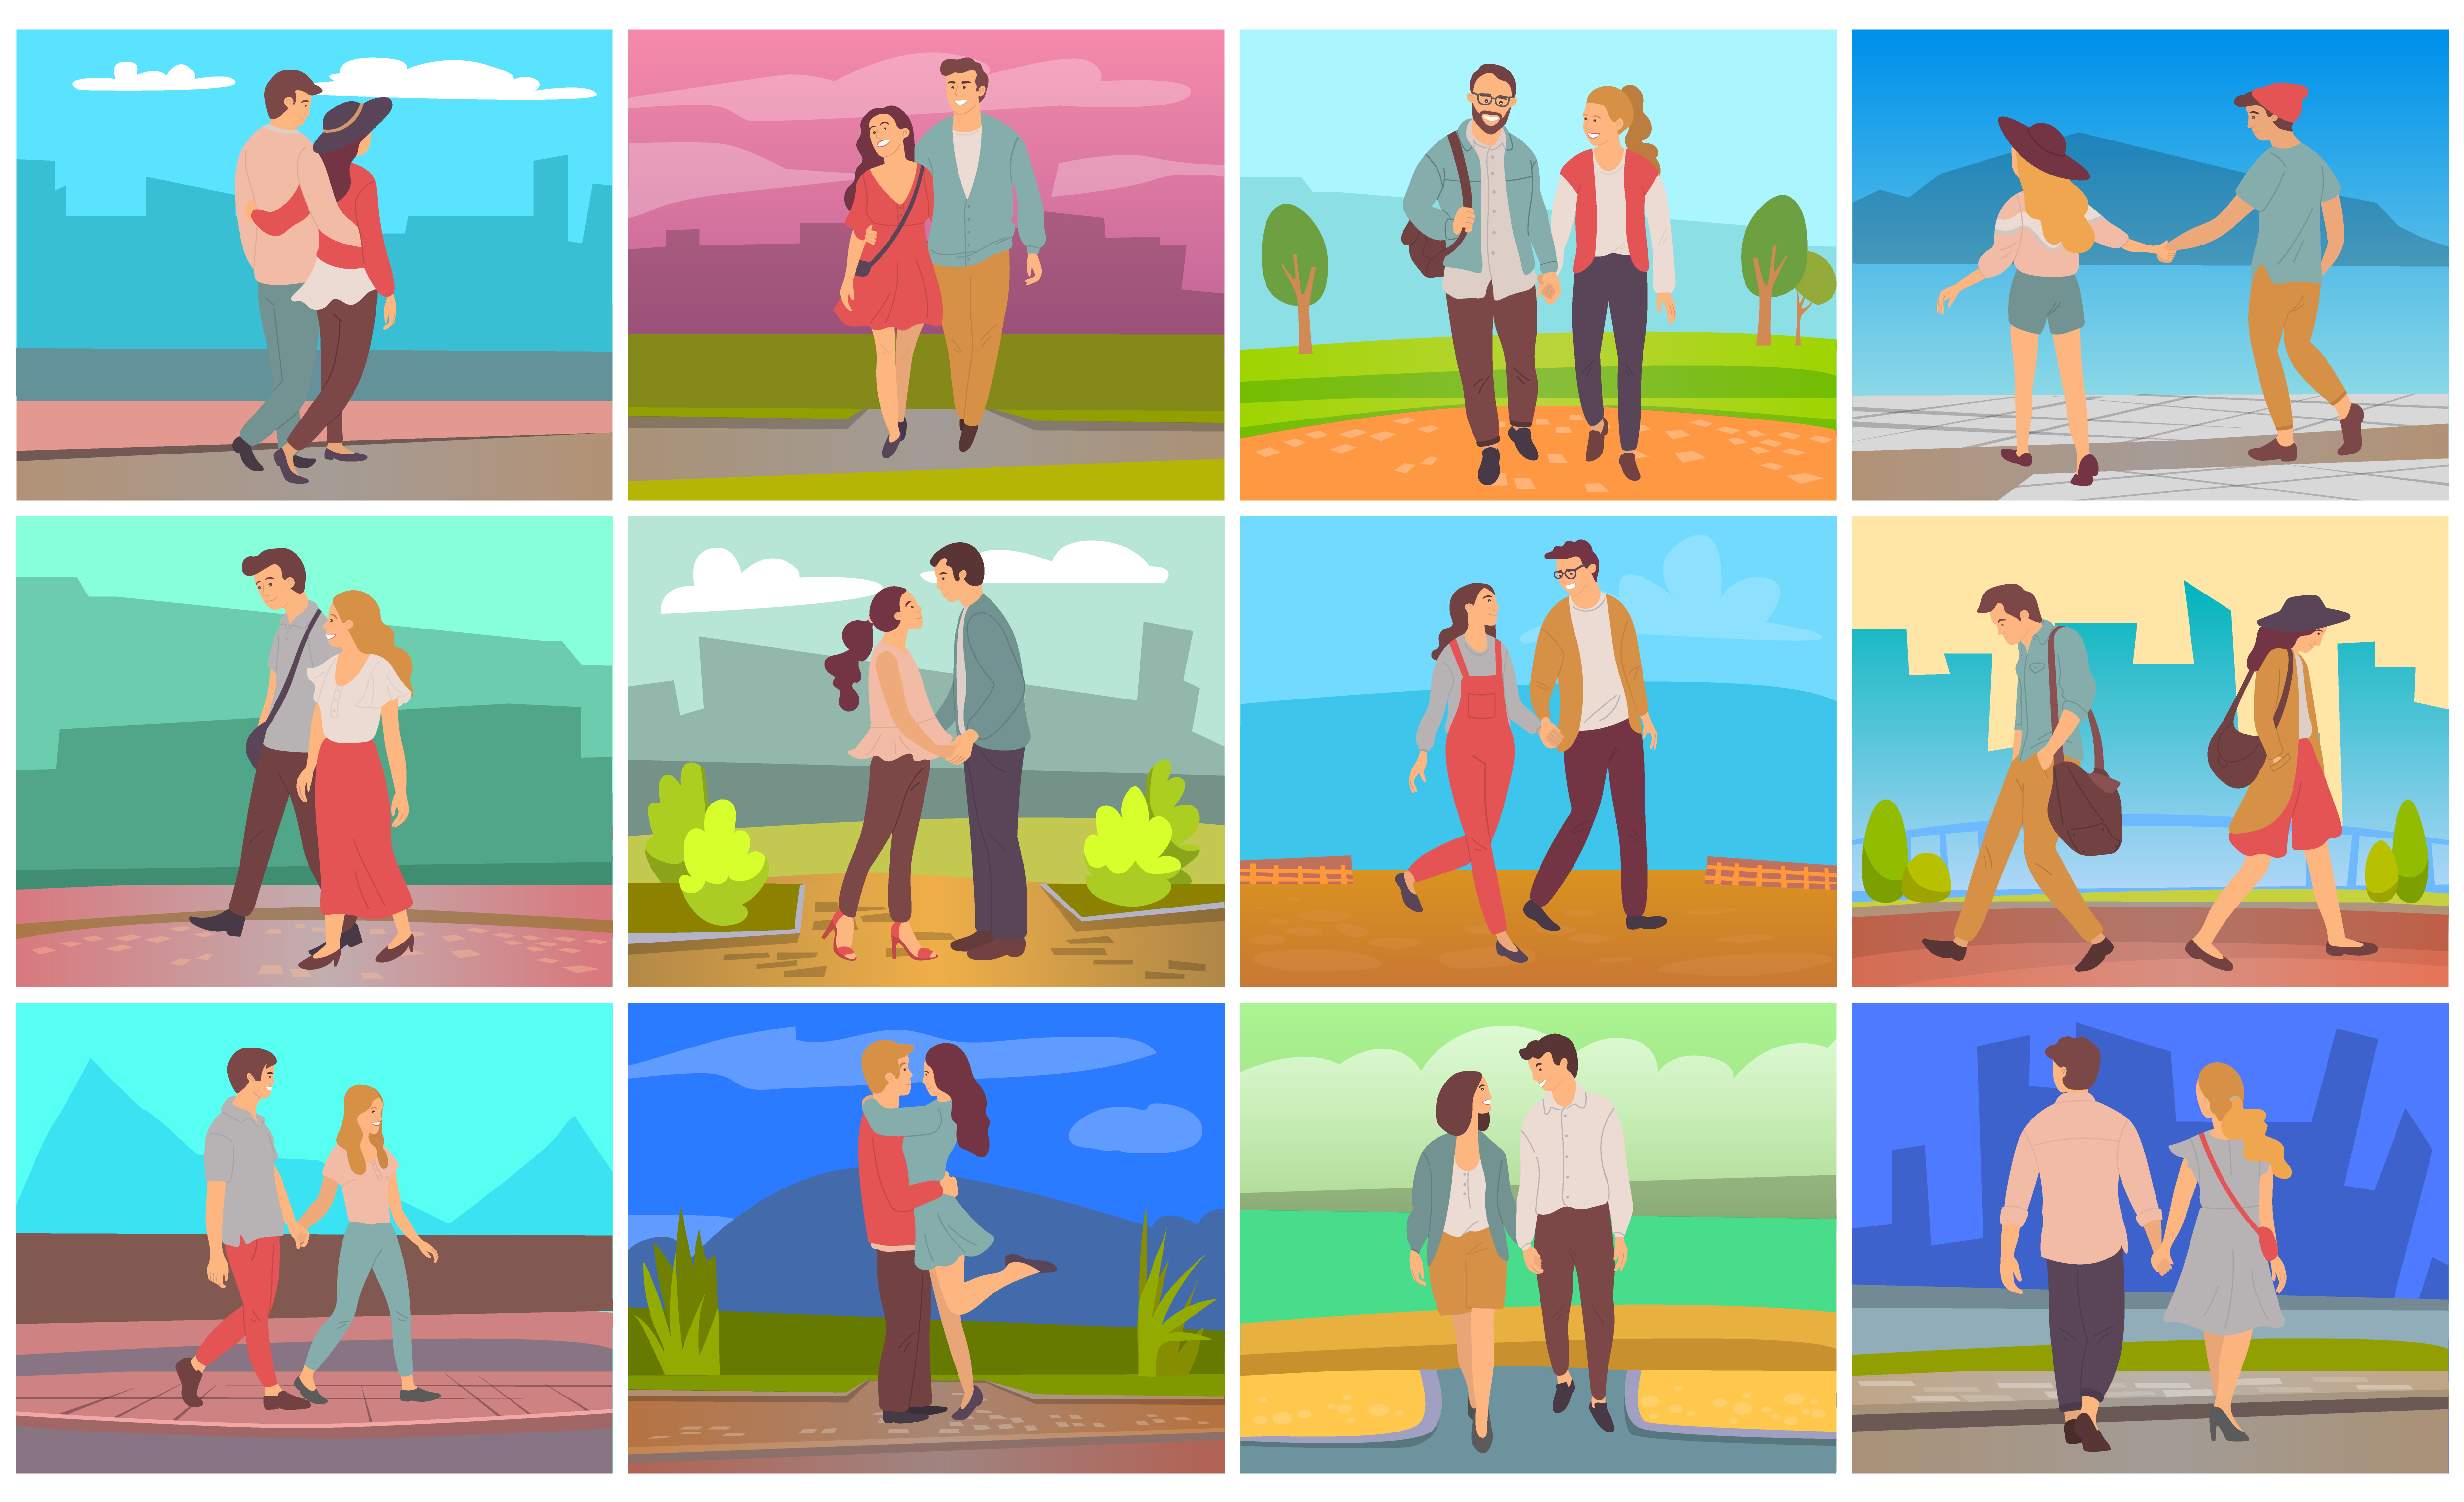 Dating people in evening vector set, man and woman romantic couple on date. Male and female, boyfriend and girlfriend celebrating anniversary of relationship. Valentine day. illustration in flat style. Romantic People, Couple Walking in Pairs Date